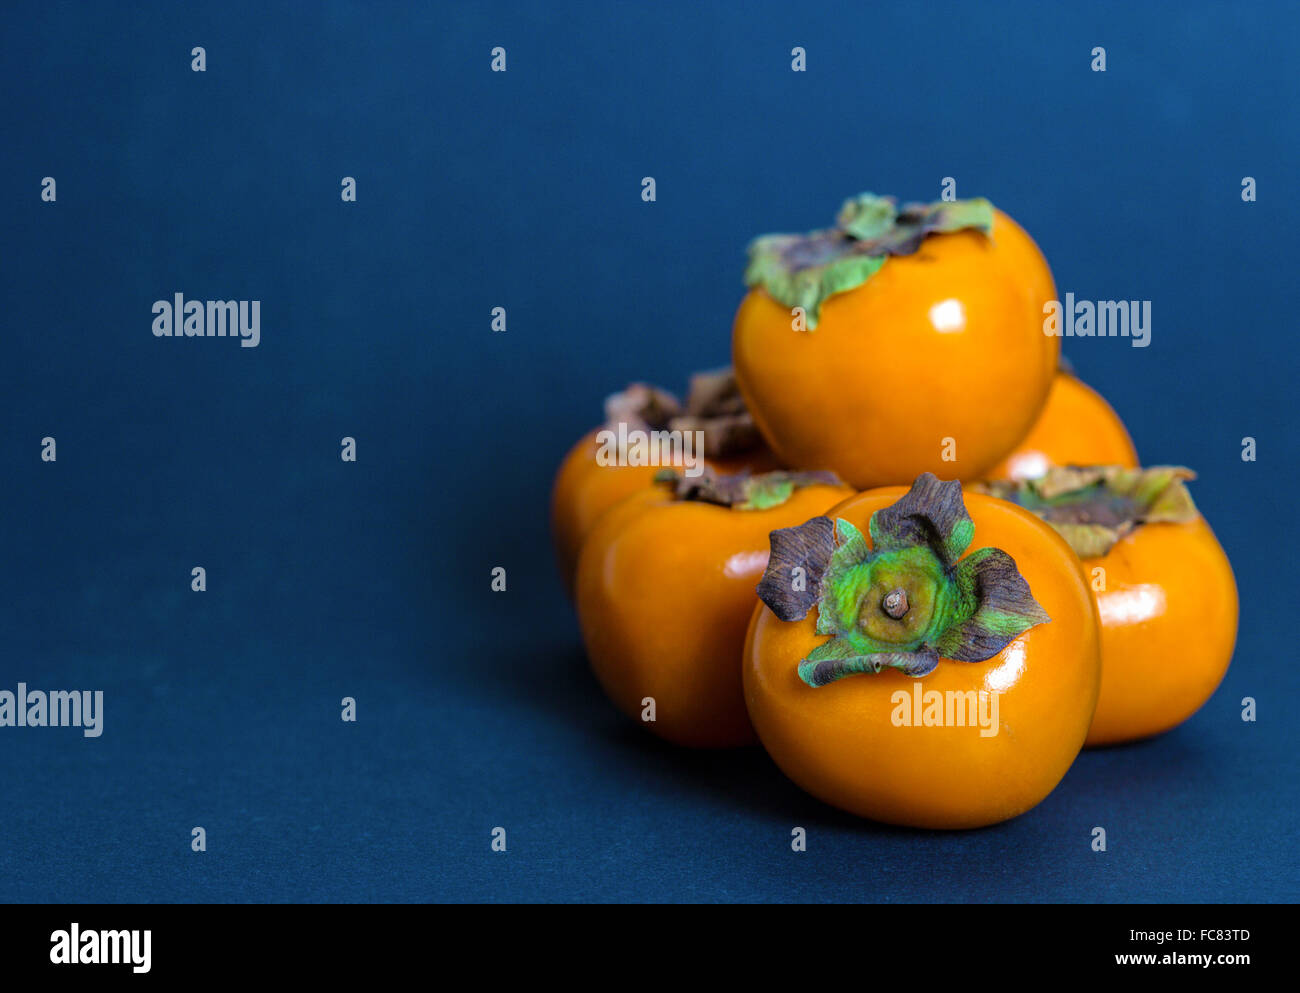 Persimmons on blue background Stock Photo